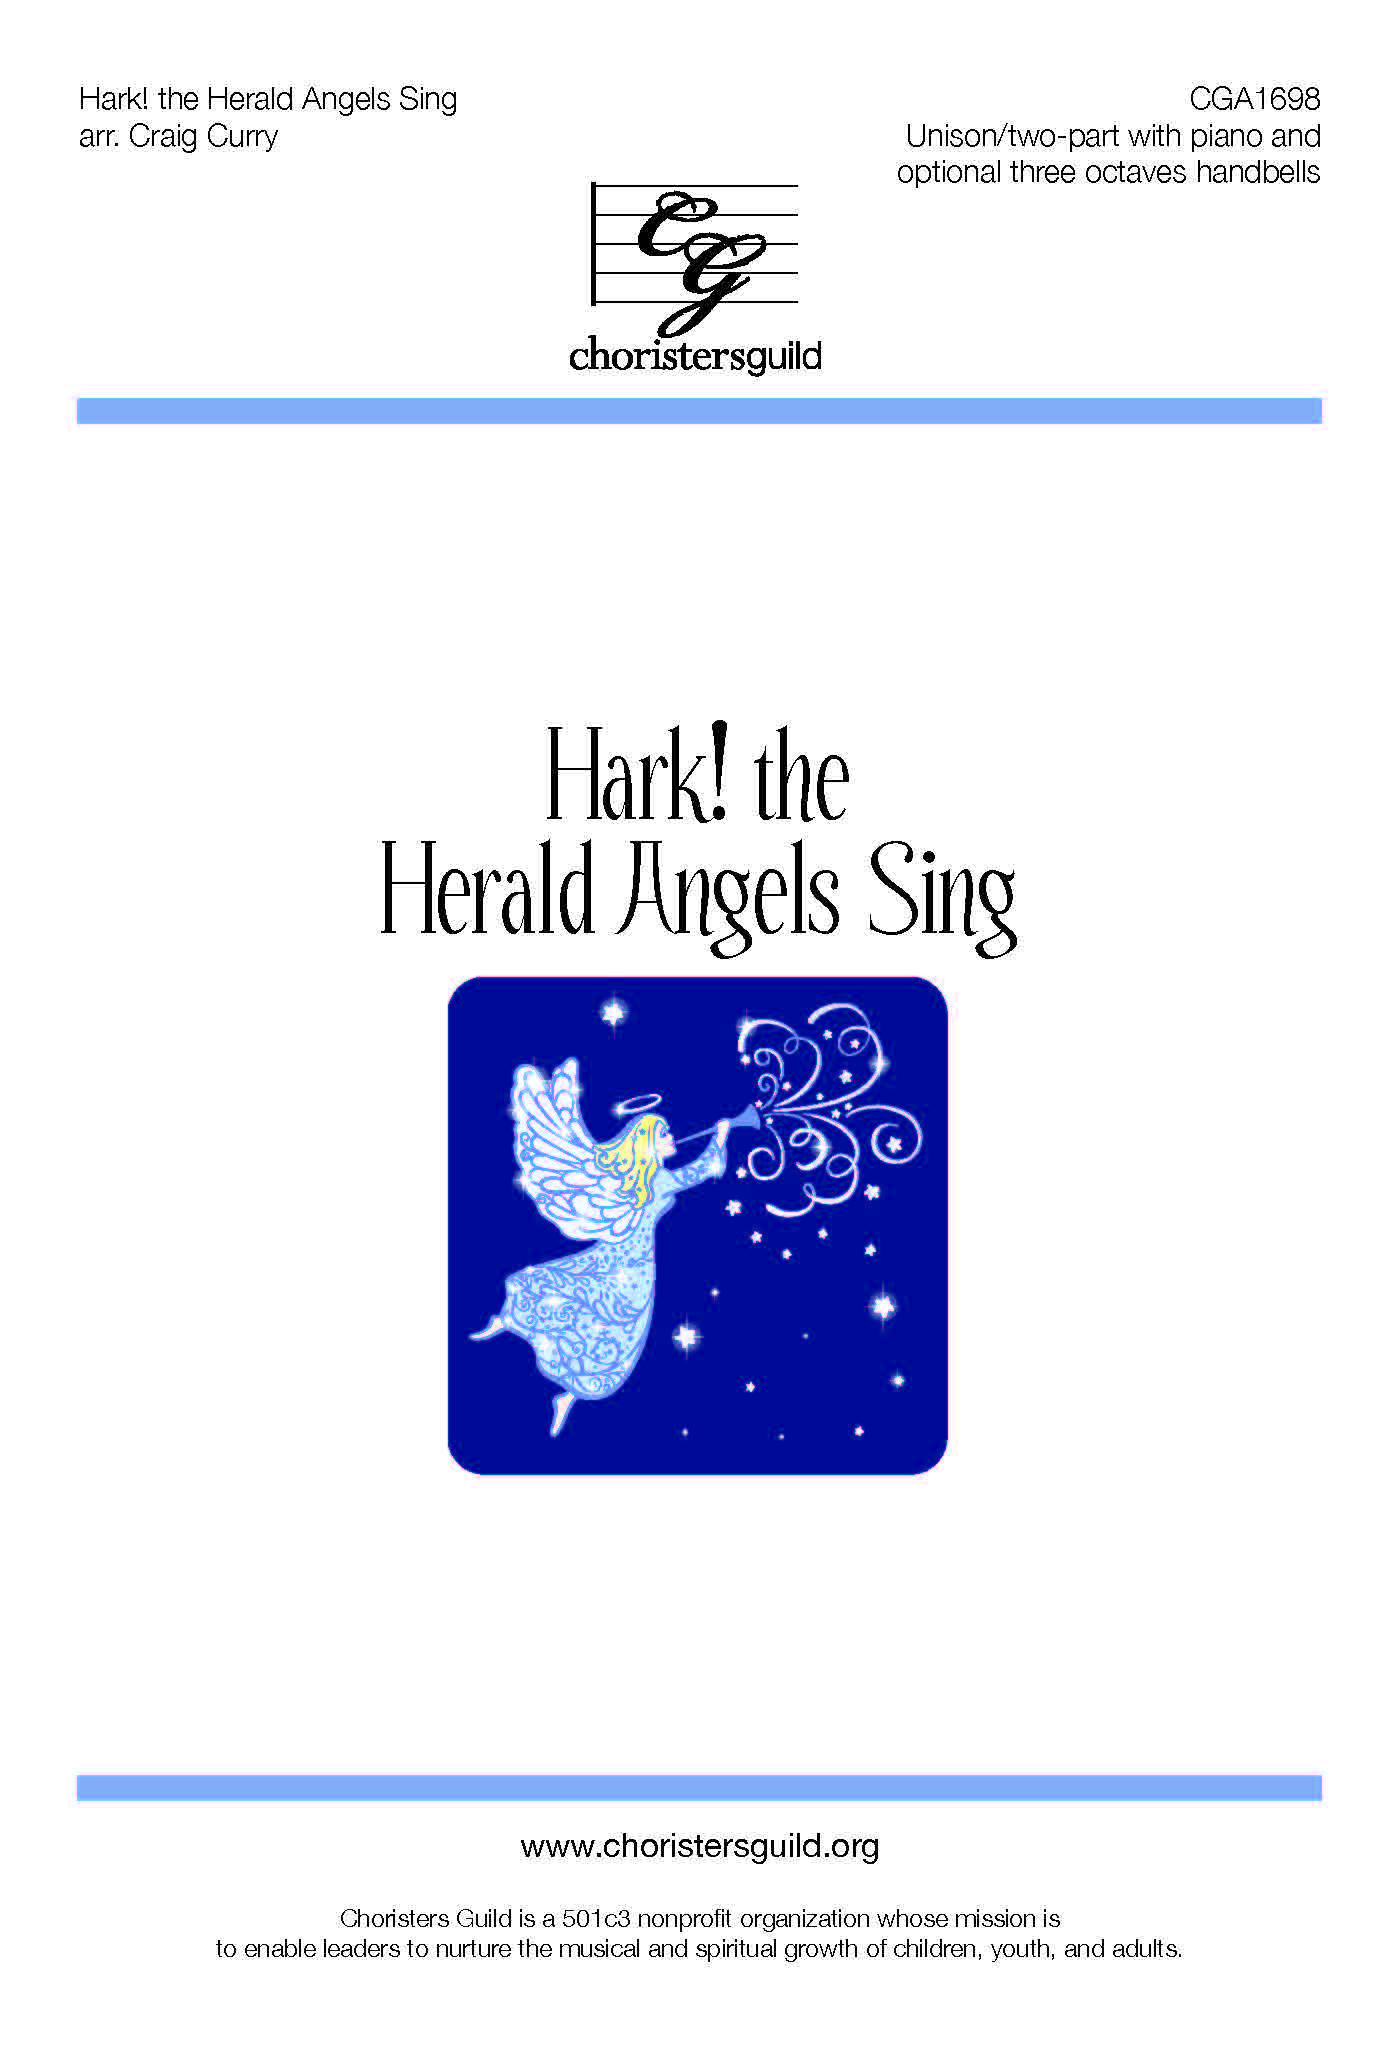 Hark! The Herald Angels Sing - Unison/two-part